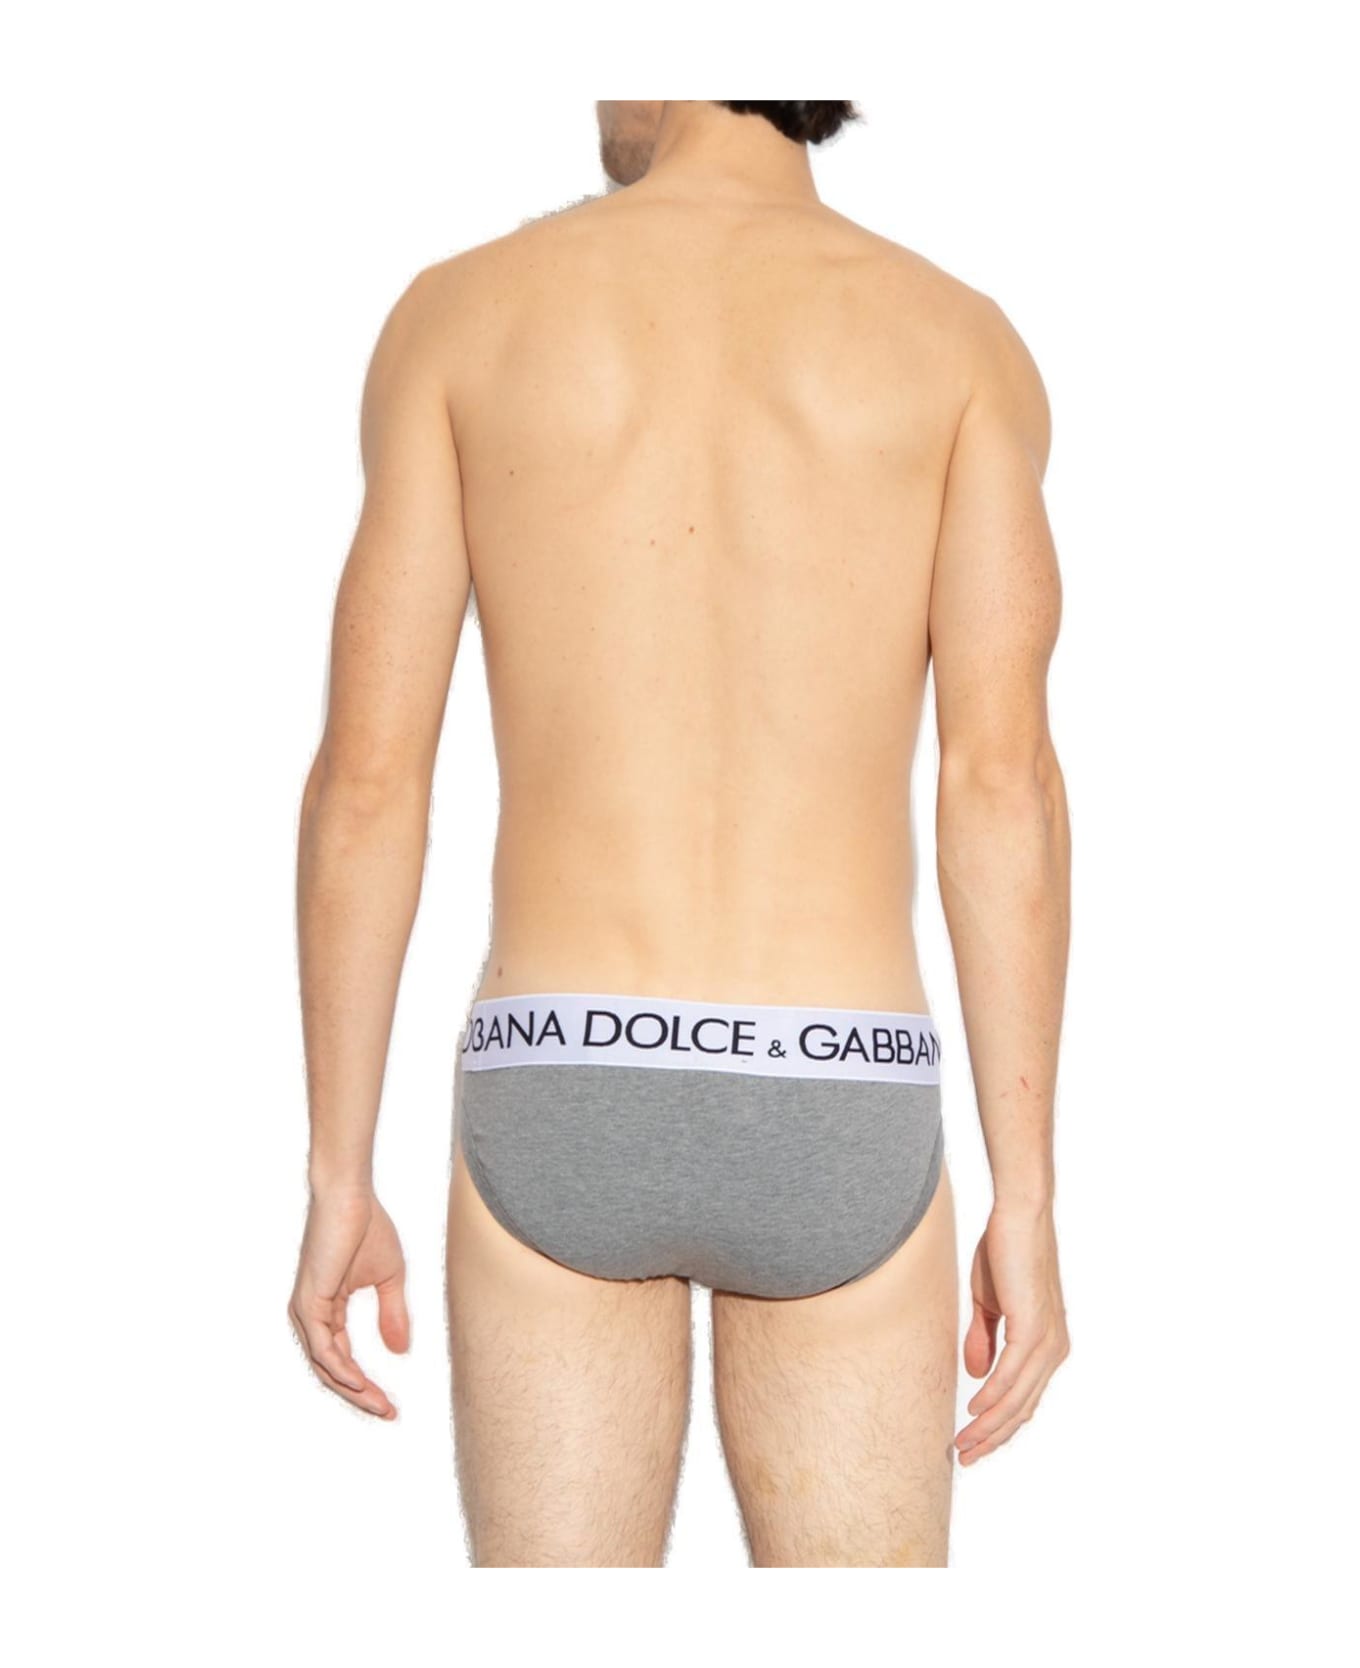 Dolce & Gabbana Two Way Stretched Mid-rise Briefs - MELANGE GREY ショーツ